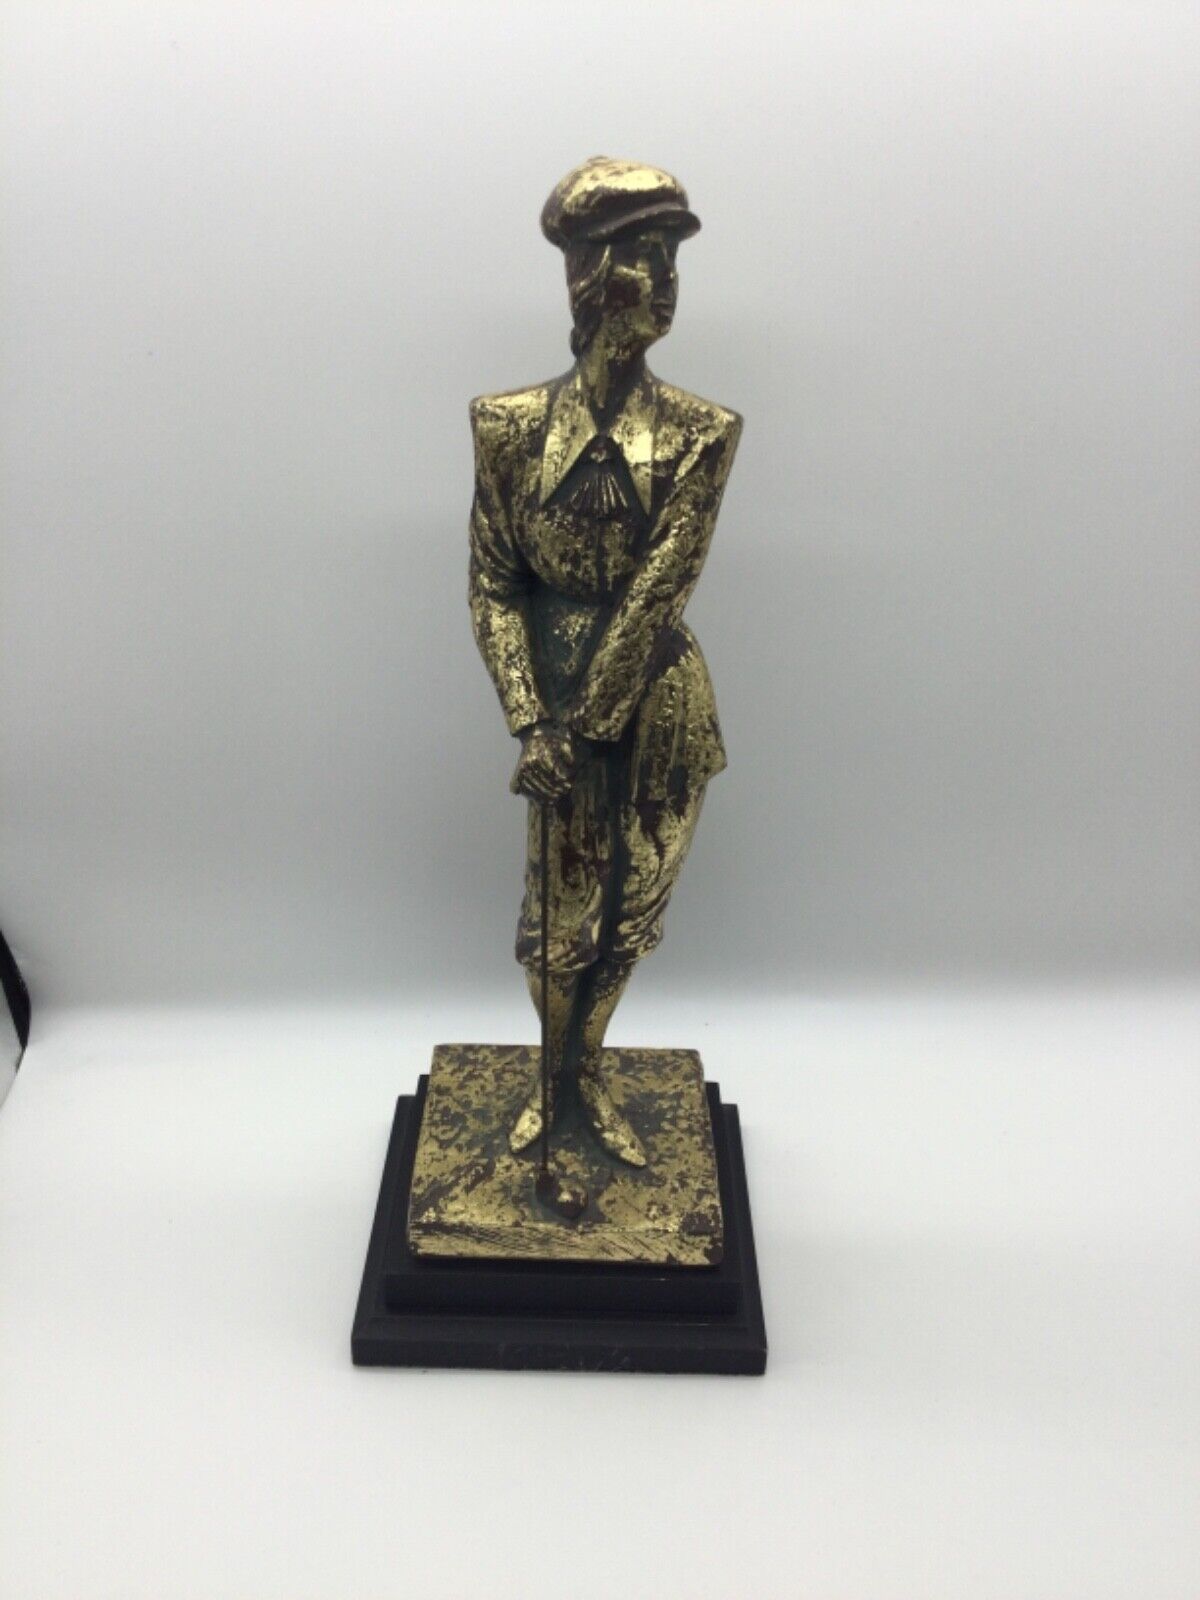 15” vintage woman golfer traditional brass country 1920s figurine gold bronze